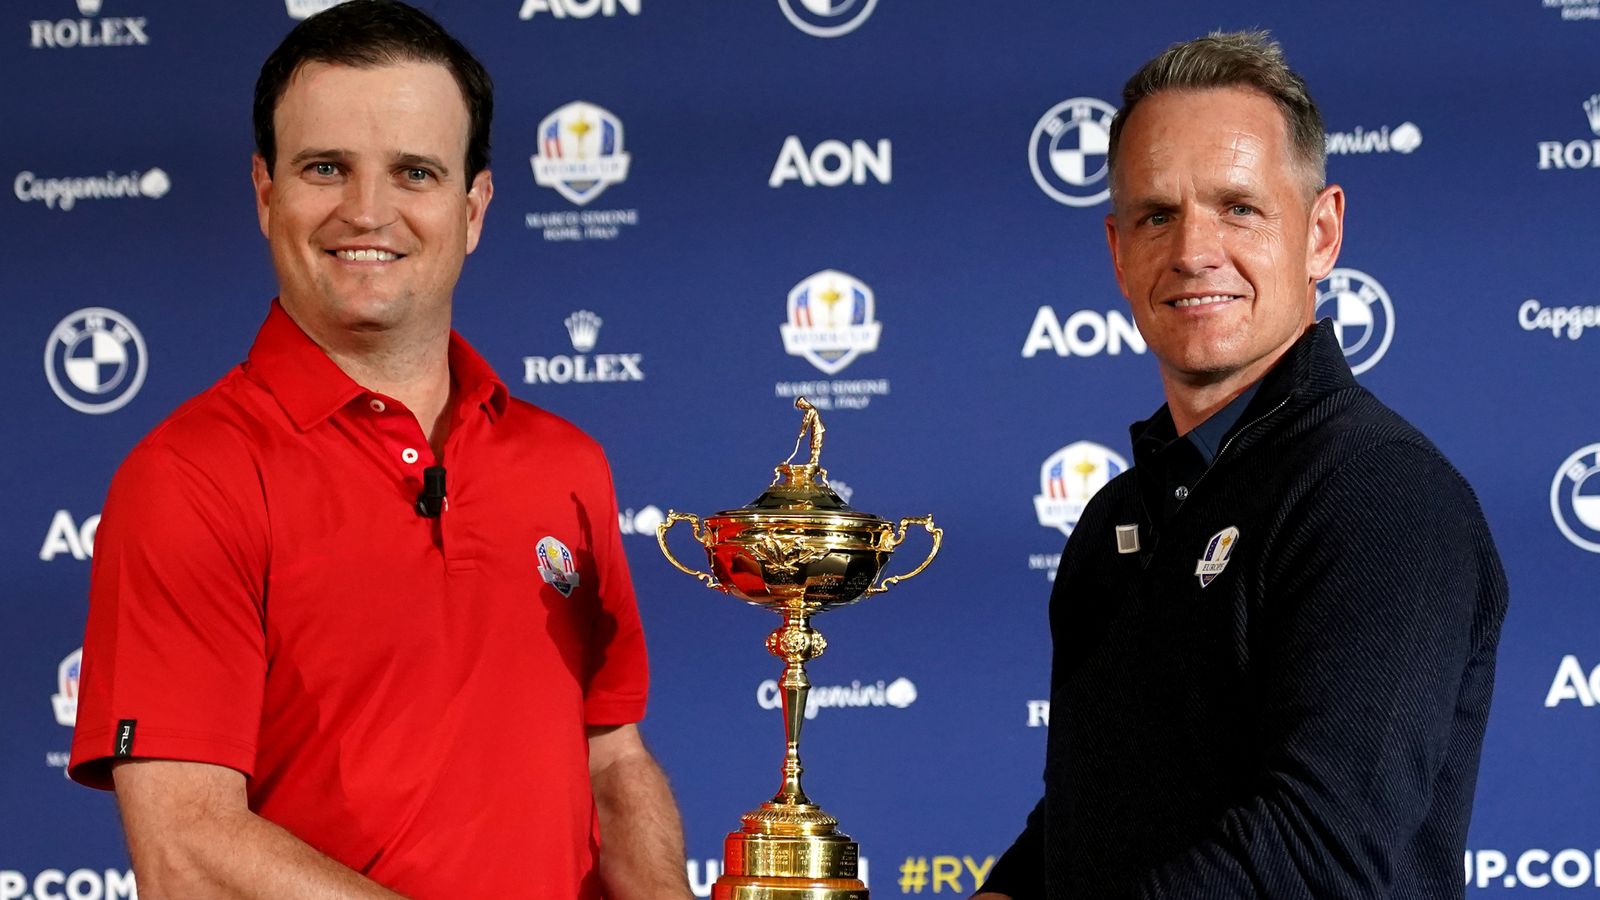 World Champions Cup: How to watch, tee times, groupings for Sunday